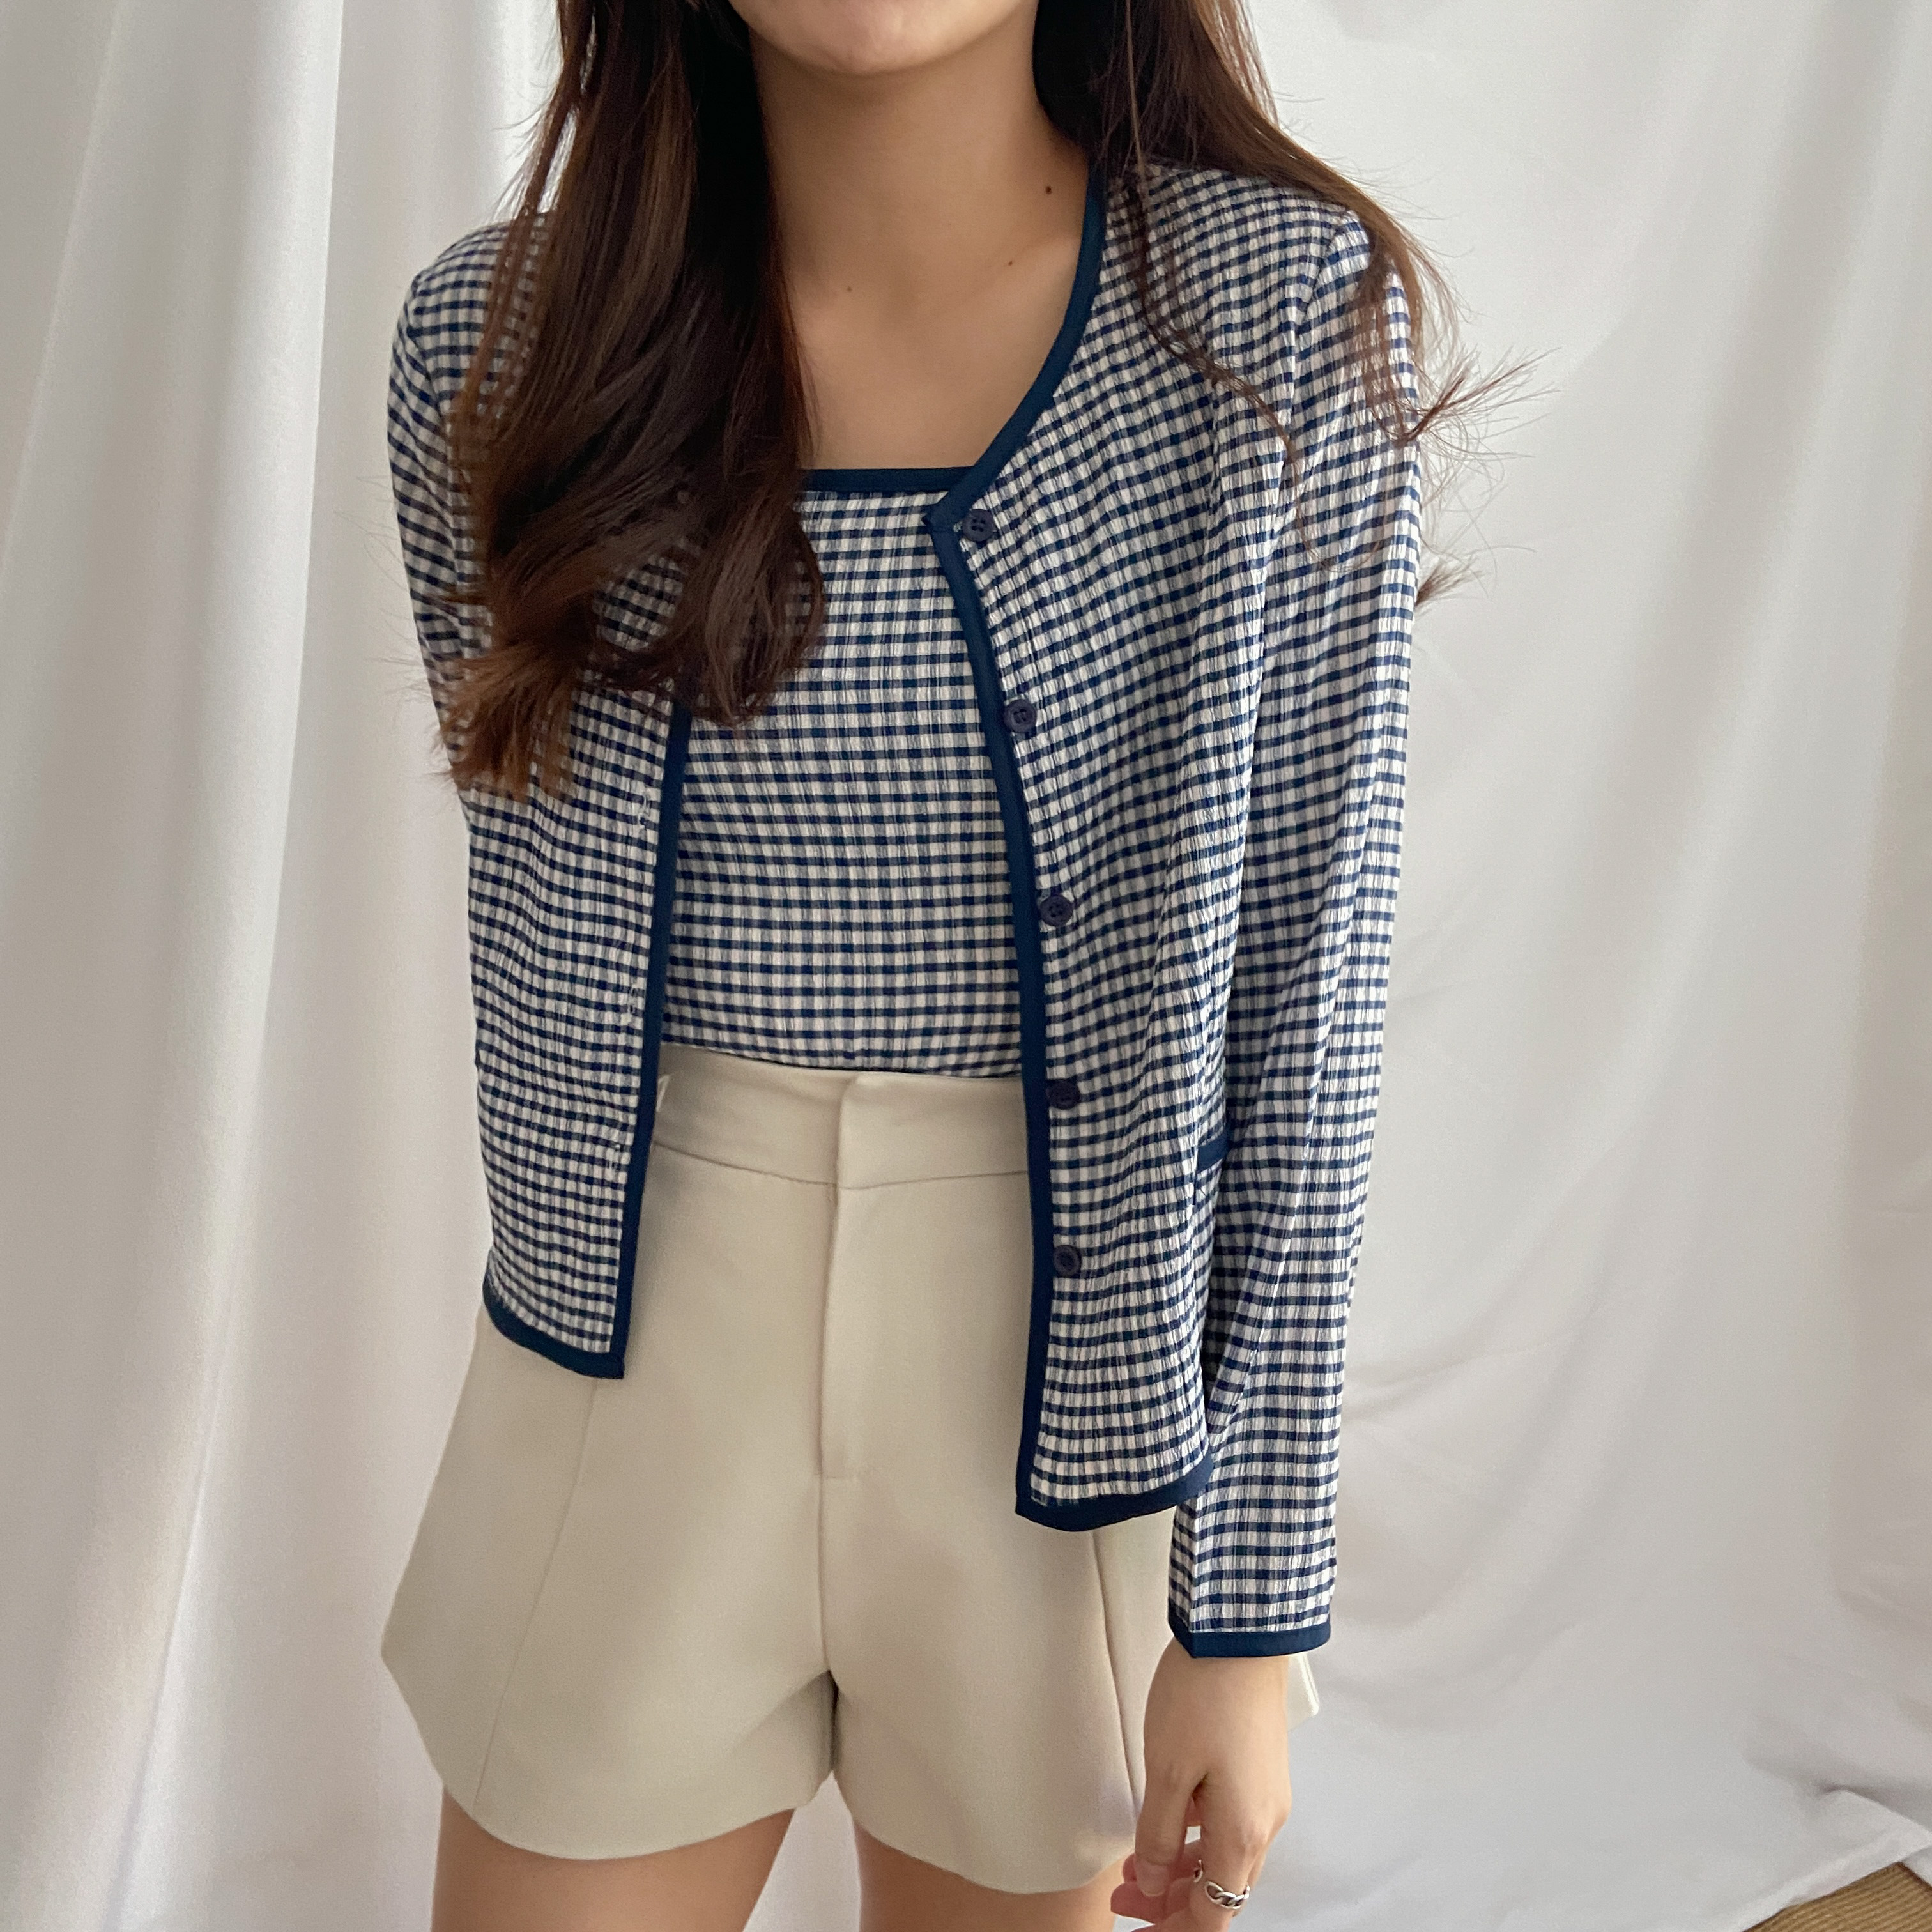 Coco Blue Checkered Two Pieces Set 小香格子皱褶两件套套装